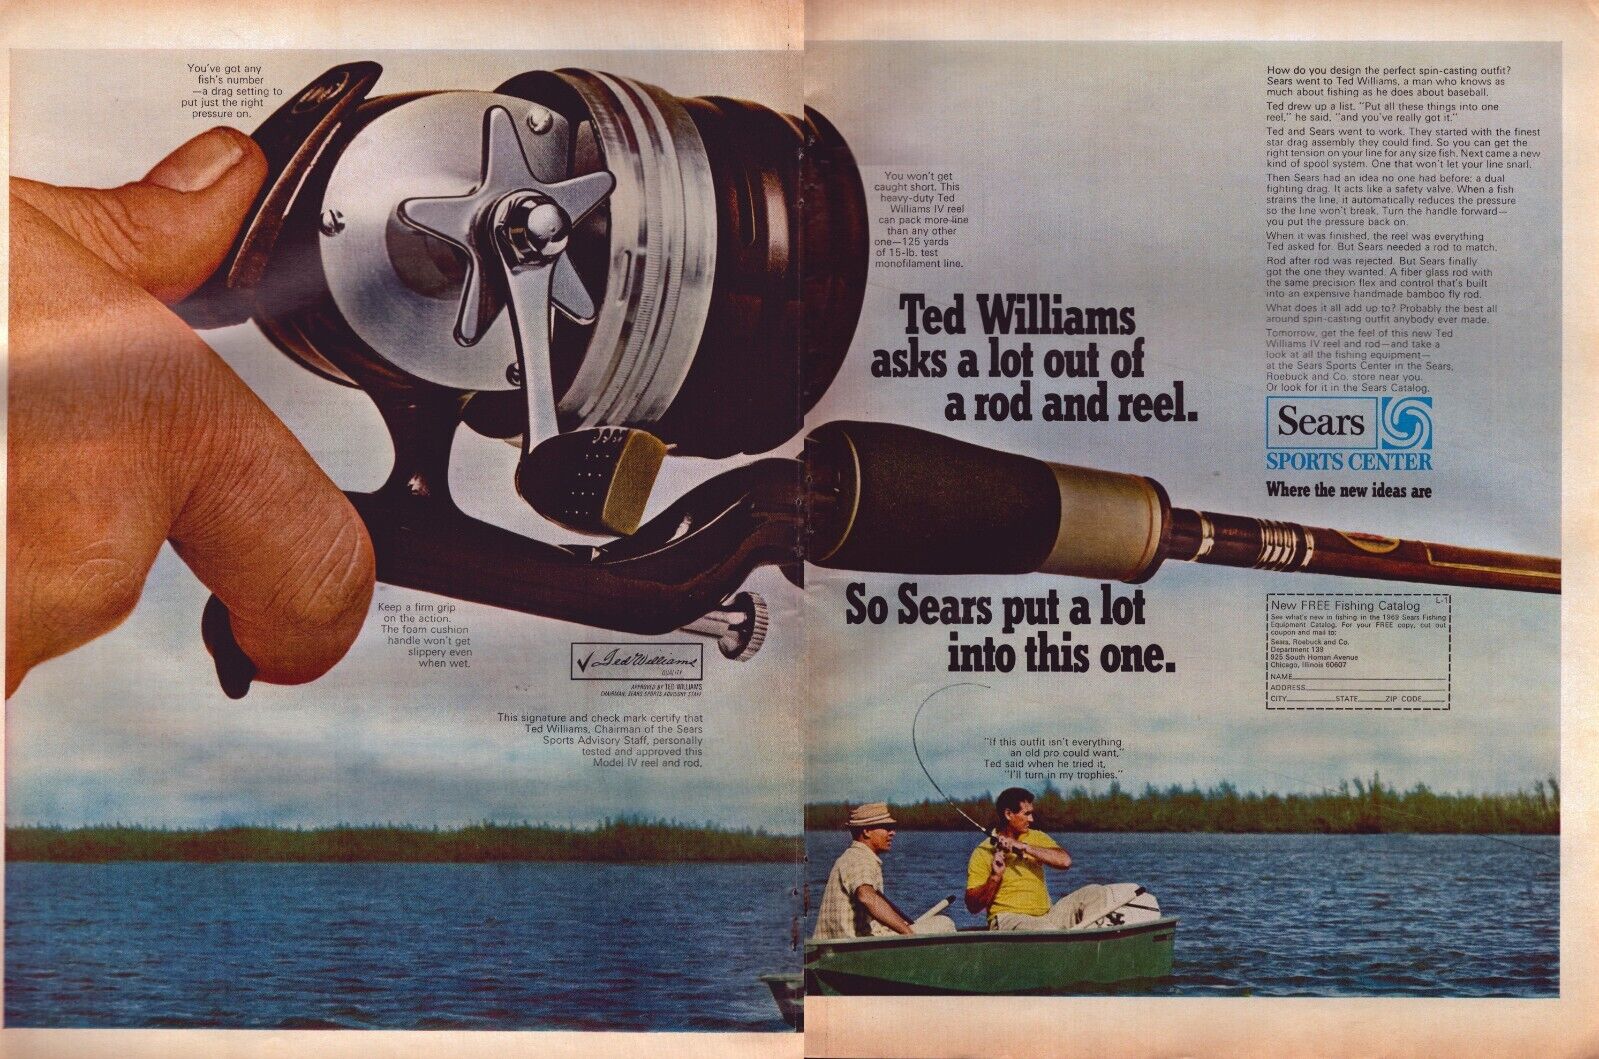 1969 Sears Ted Williams Fishing Rod Reel TWO PAGE Print Ad Boat Sports Center